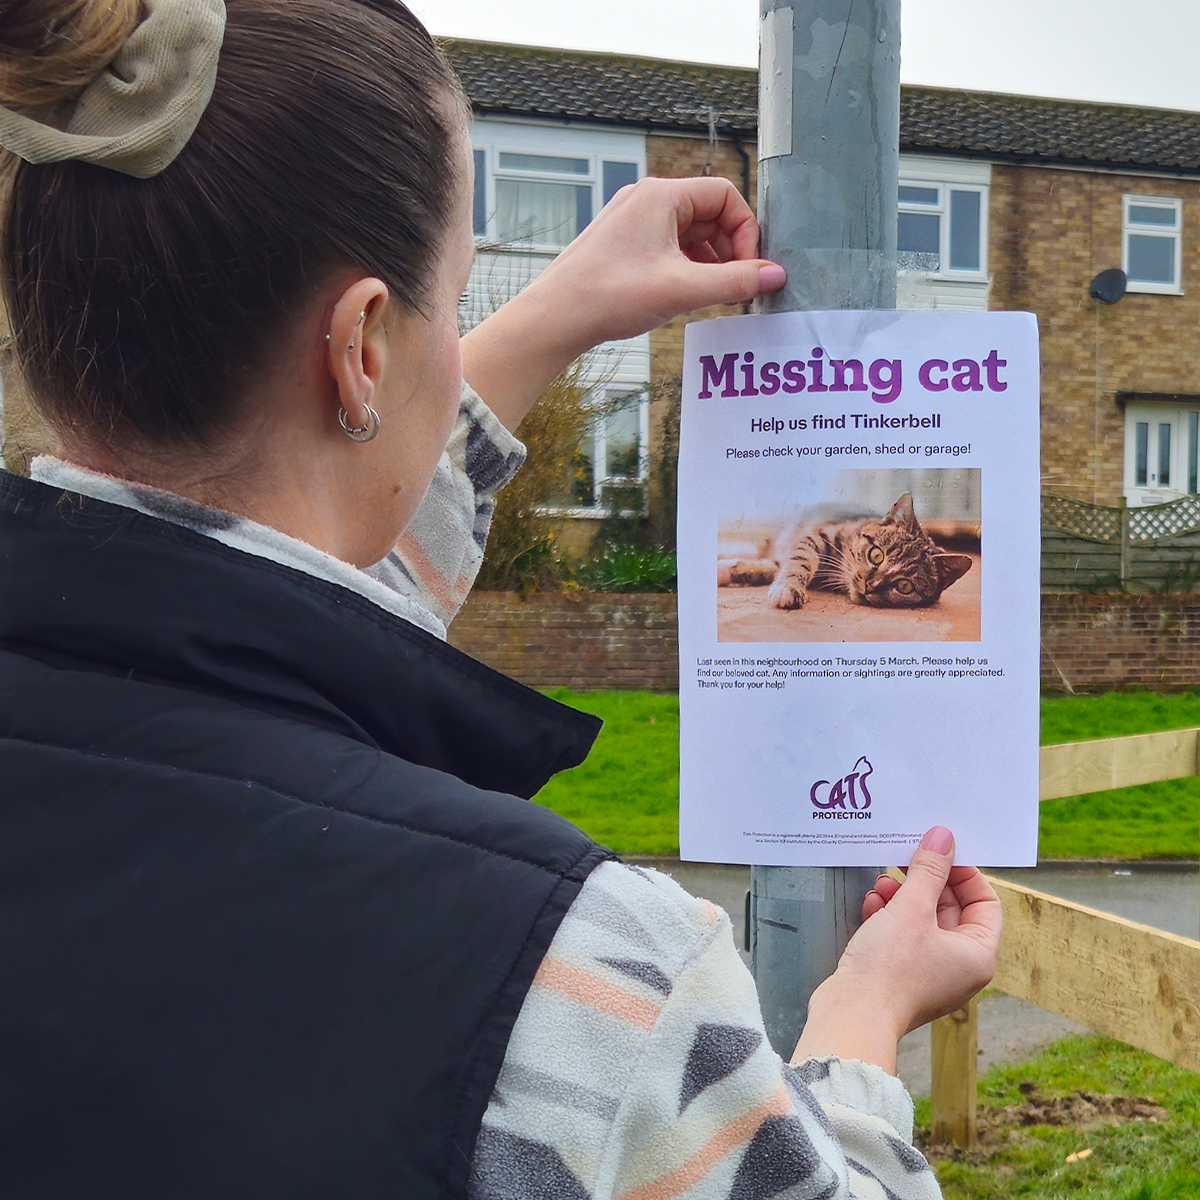 If your cat was to go missing, having them microchipped gives them the best chance of being reunited with you. Don't wait, speak to your vet about getting your pet cat microchipped. spr.ly/Microchipping